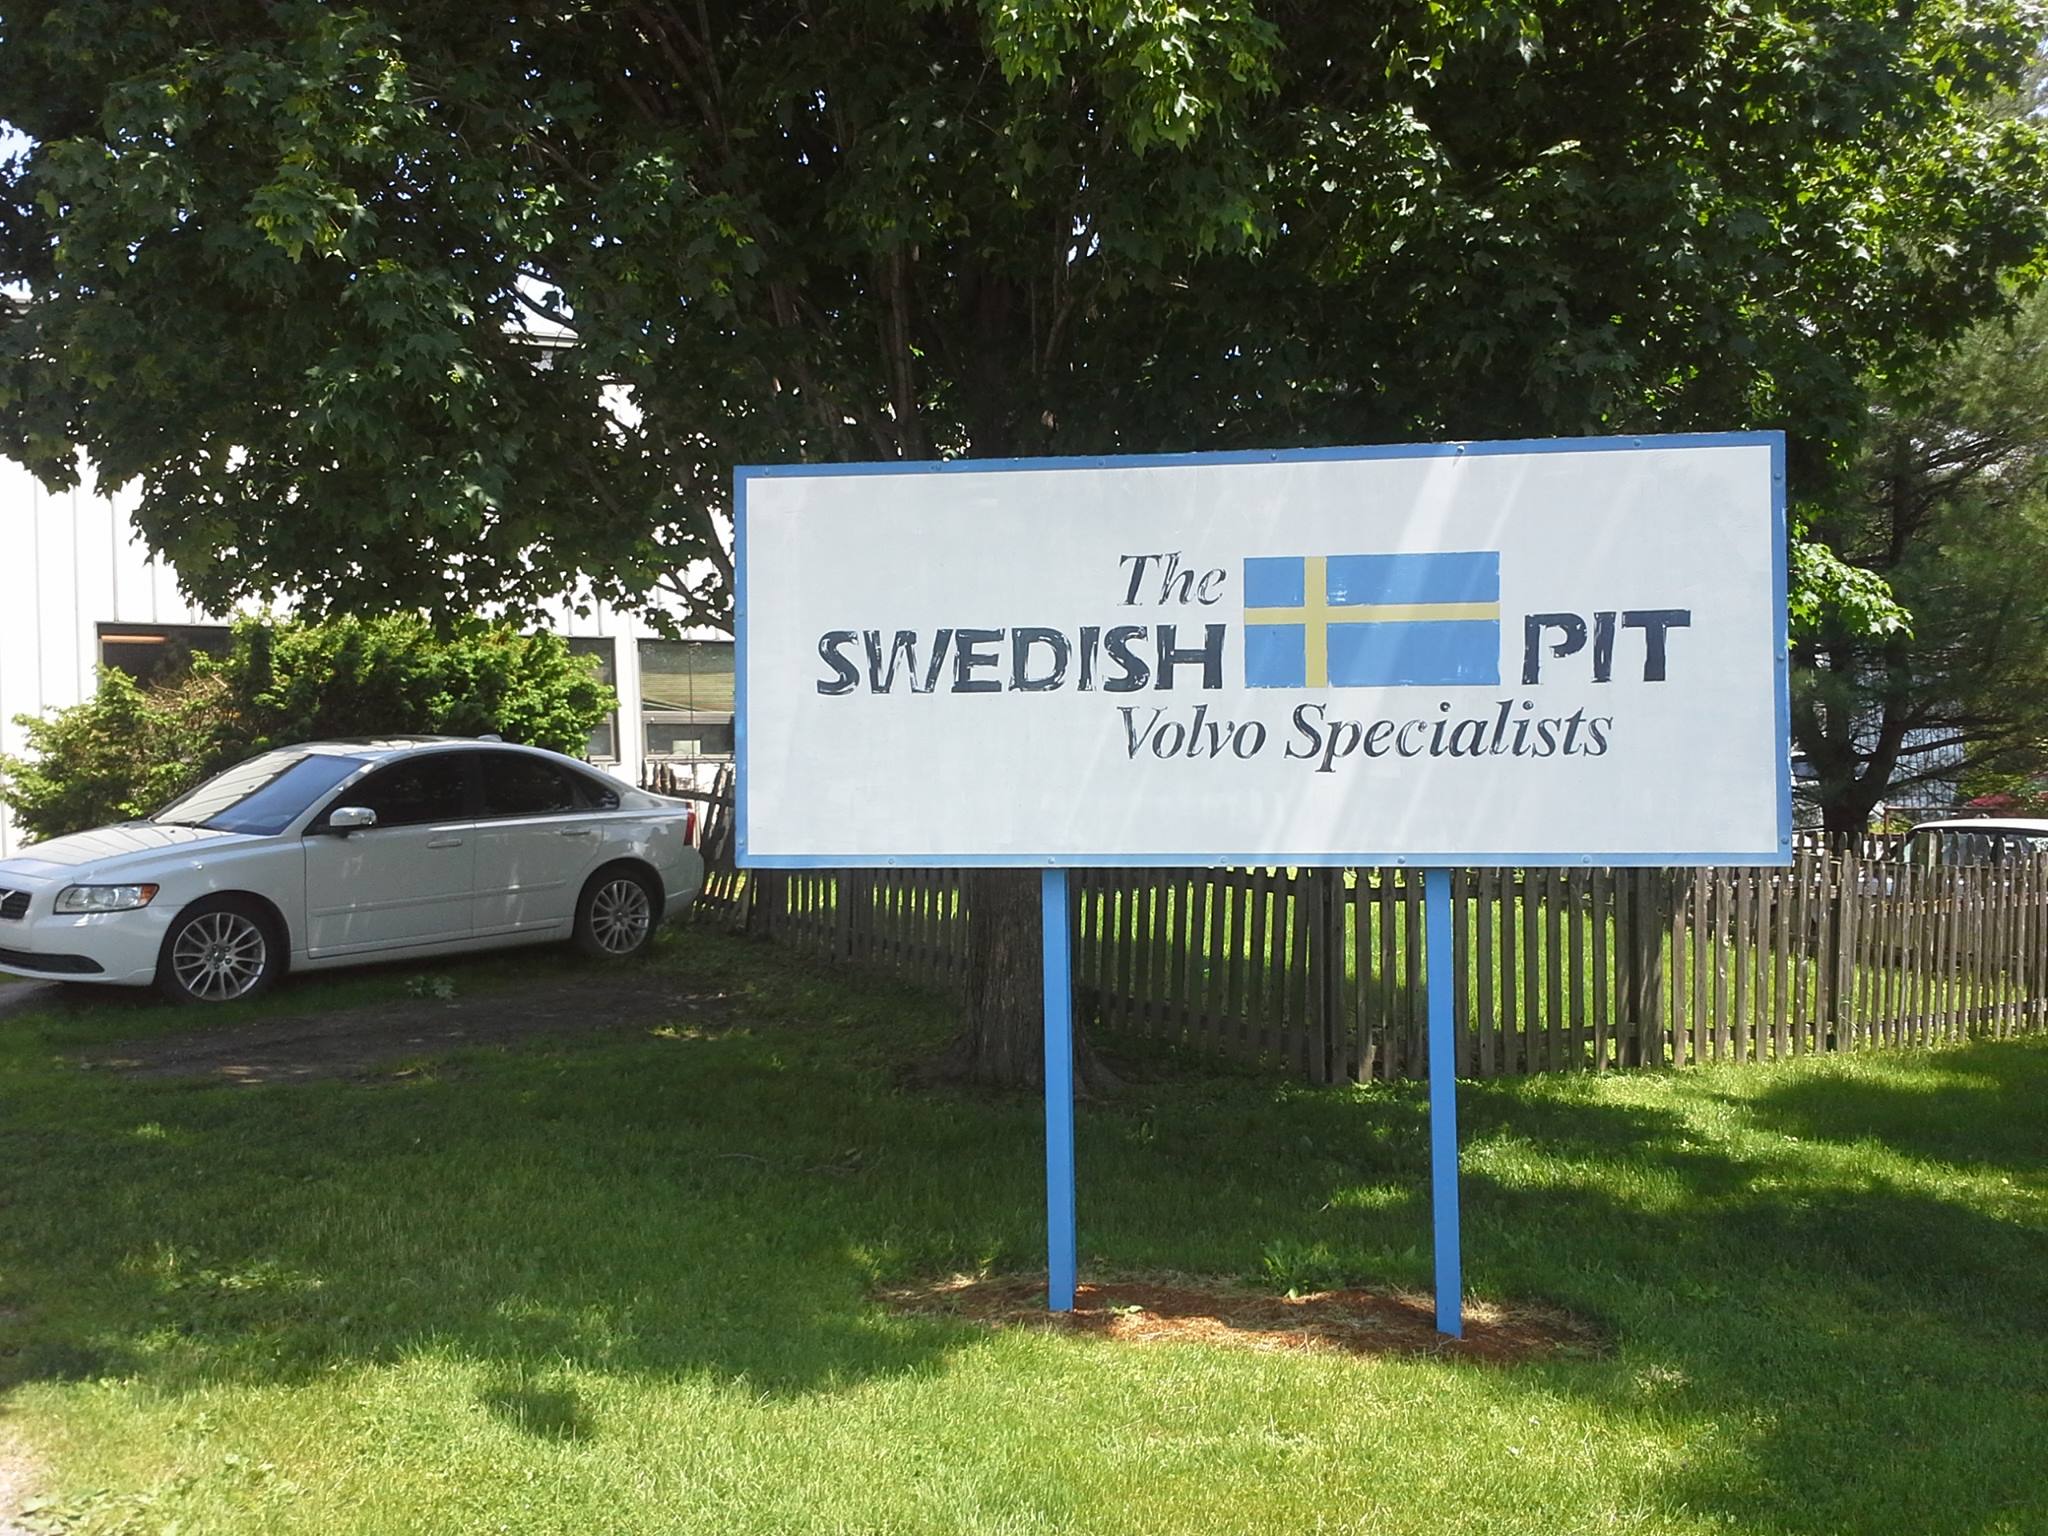 The Swedish Pit - The Volvo Specialists